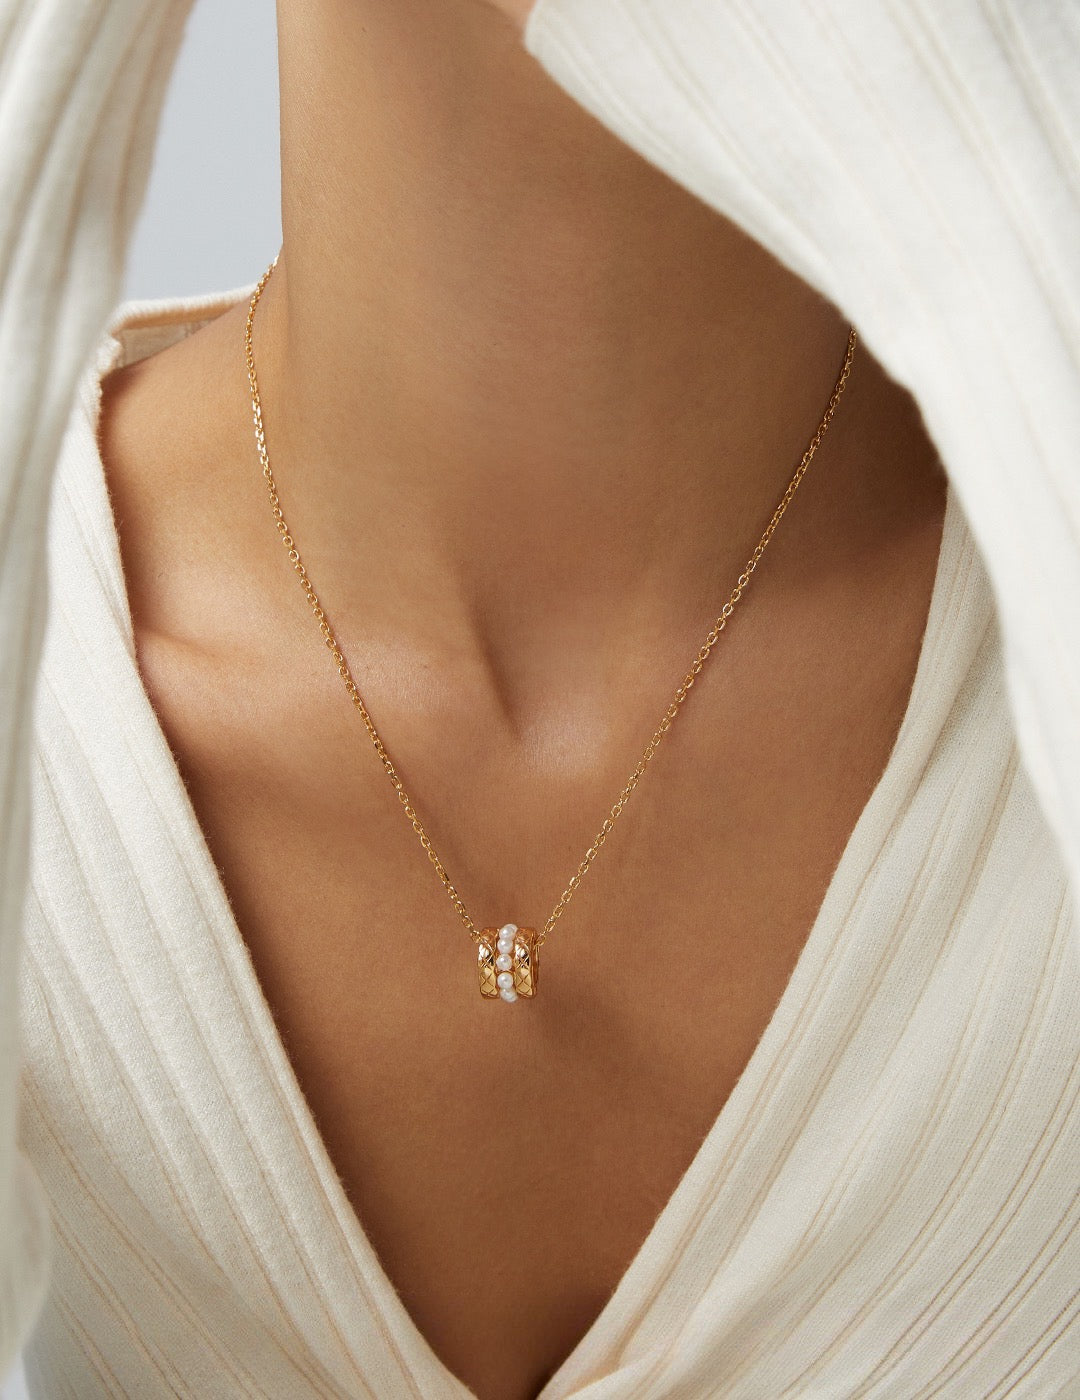 Timeless Grace Necklace Enhanced with Delicate Pearls - S925 Sterling Silver with 18K Gold Vermeil - Pearl Luminance - Pearlescent Wholeness 